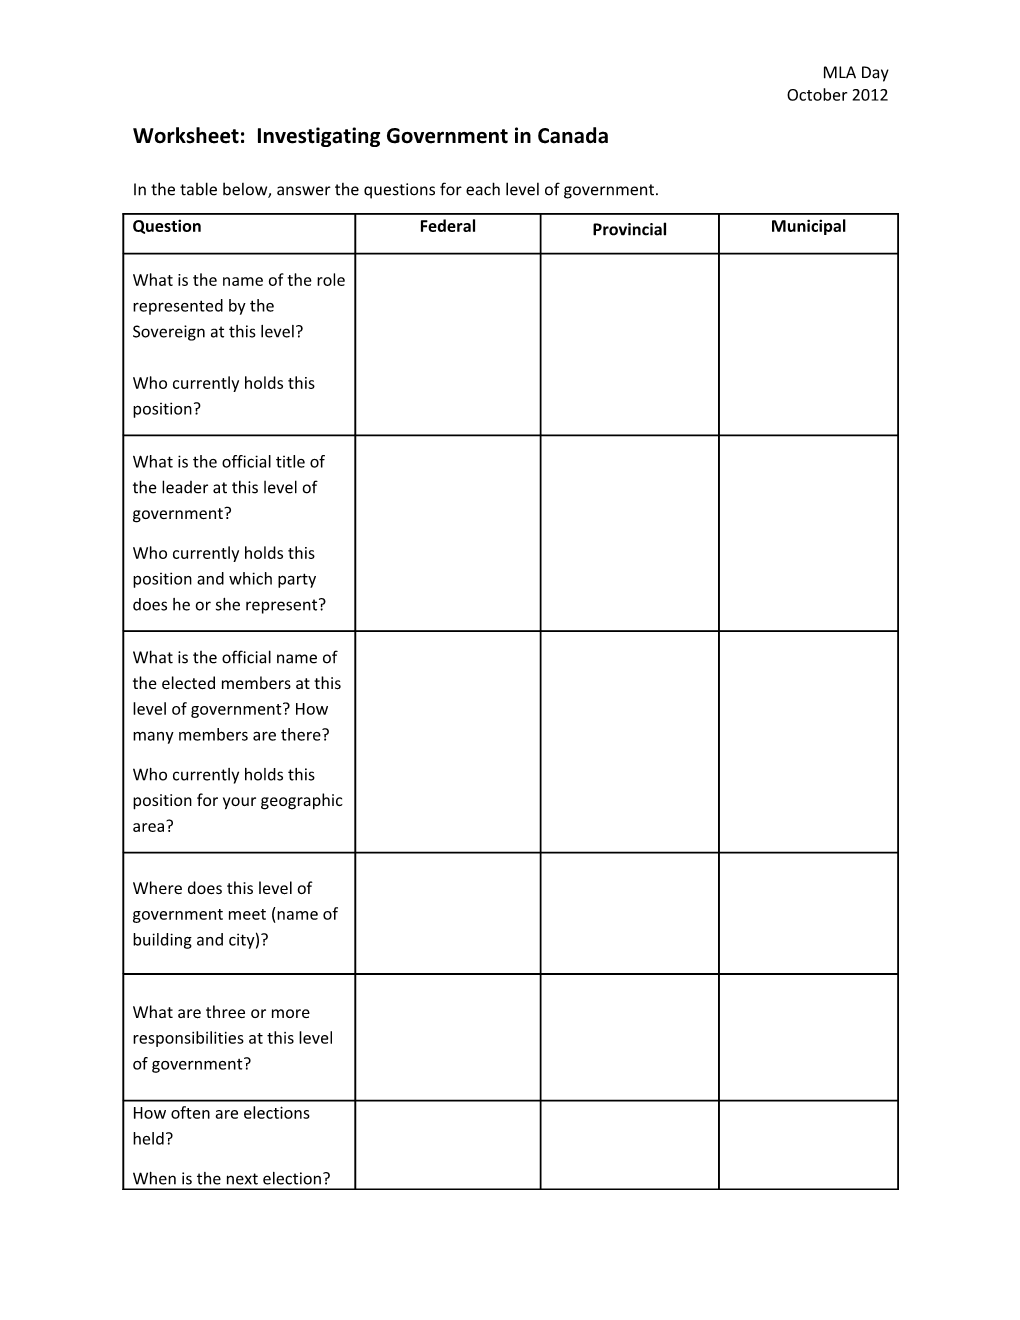 Worksheet: Investigating Government in Canada